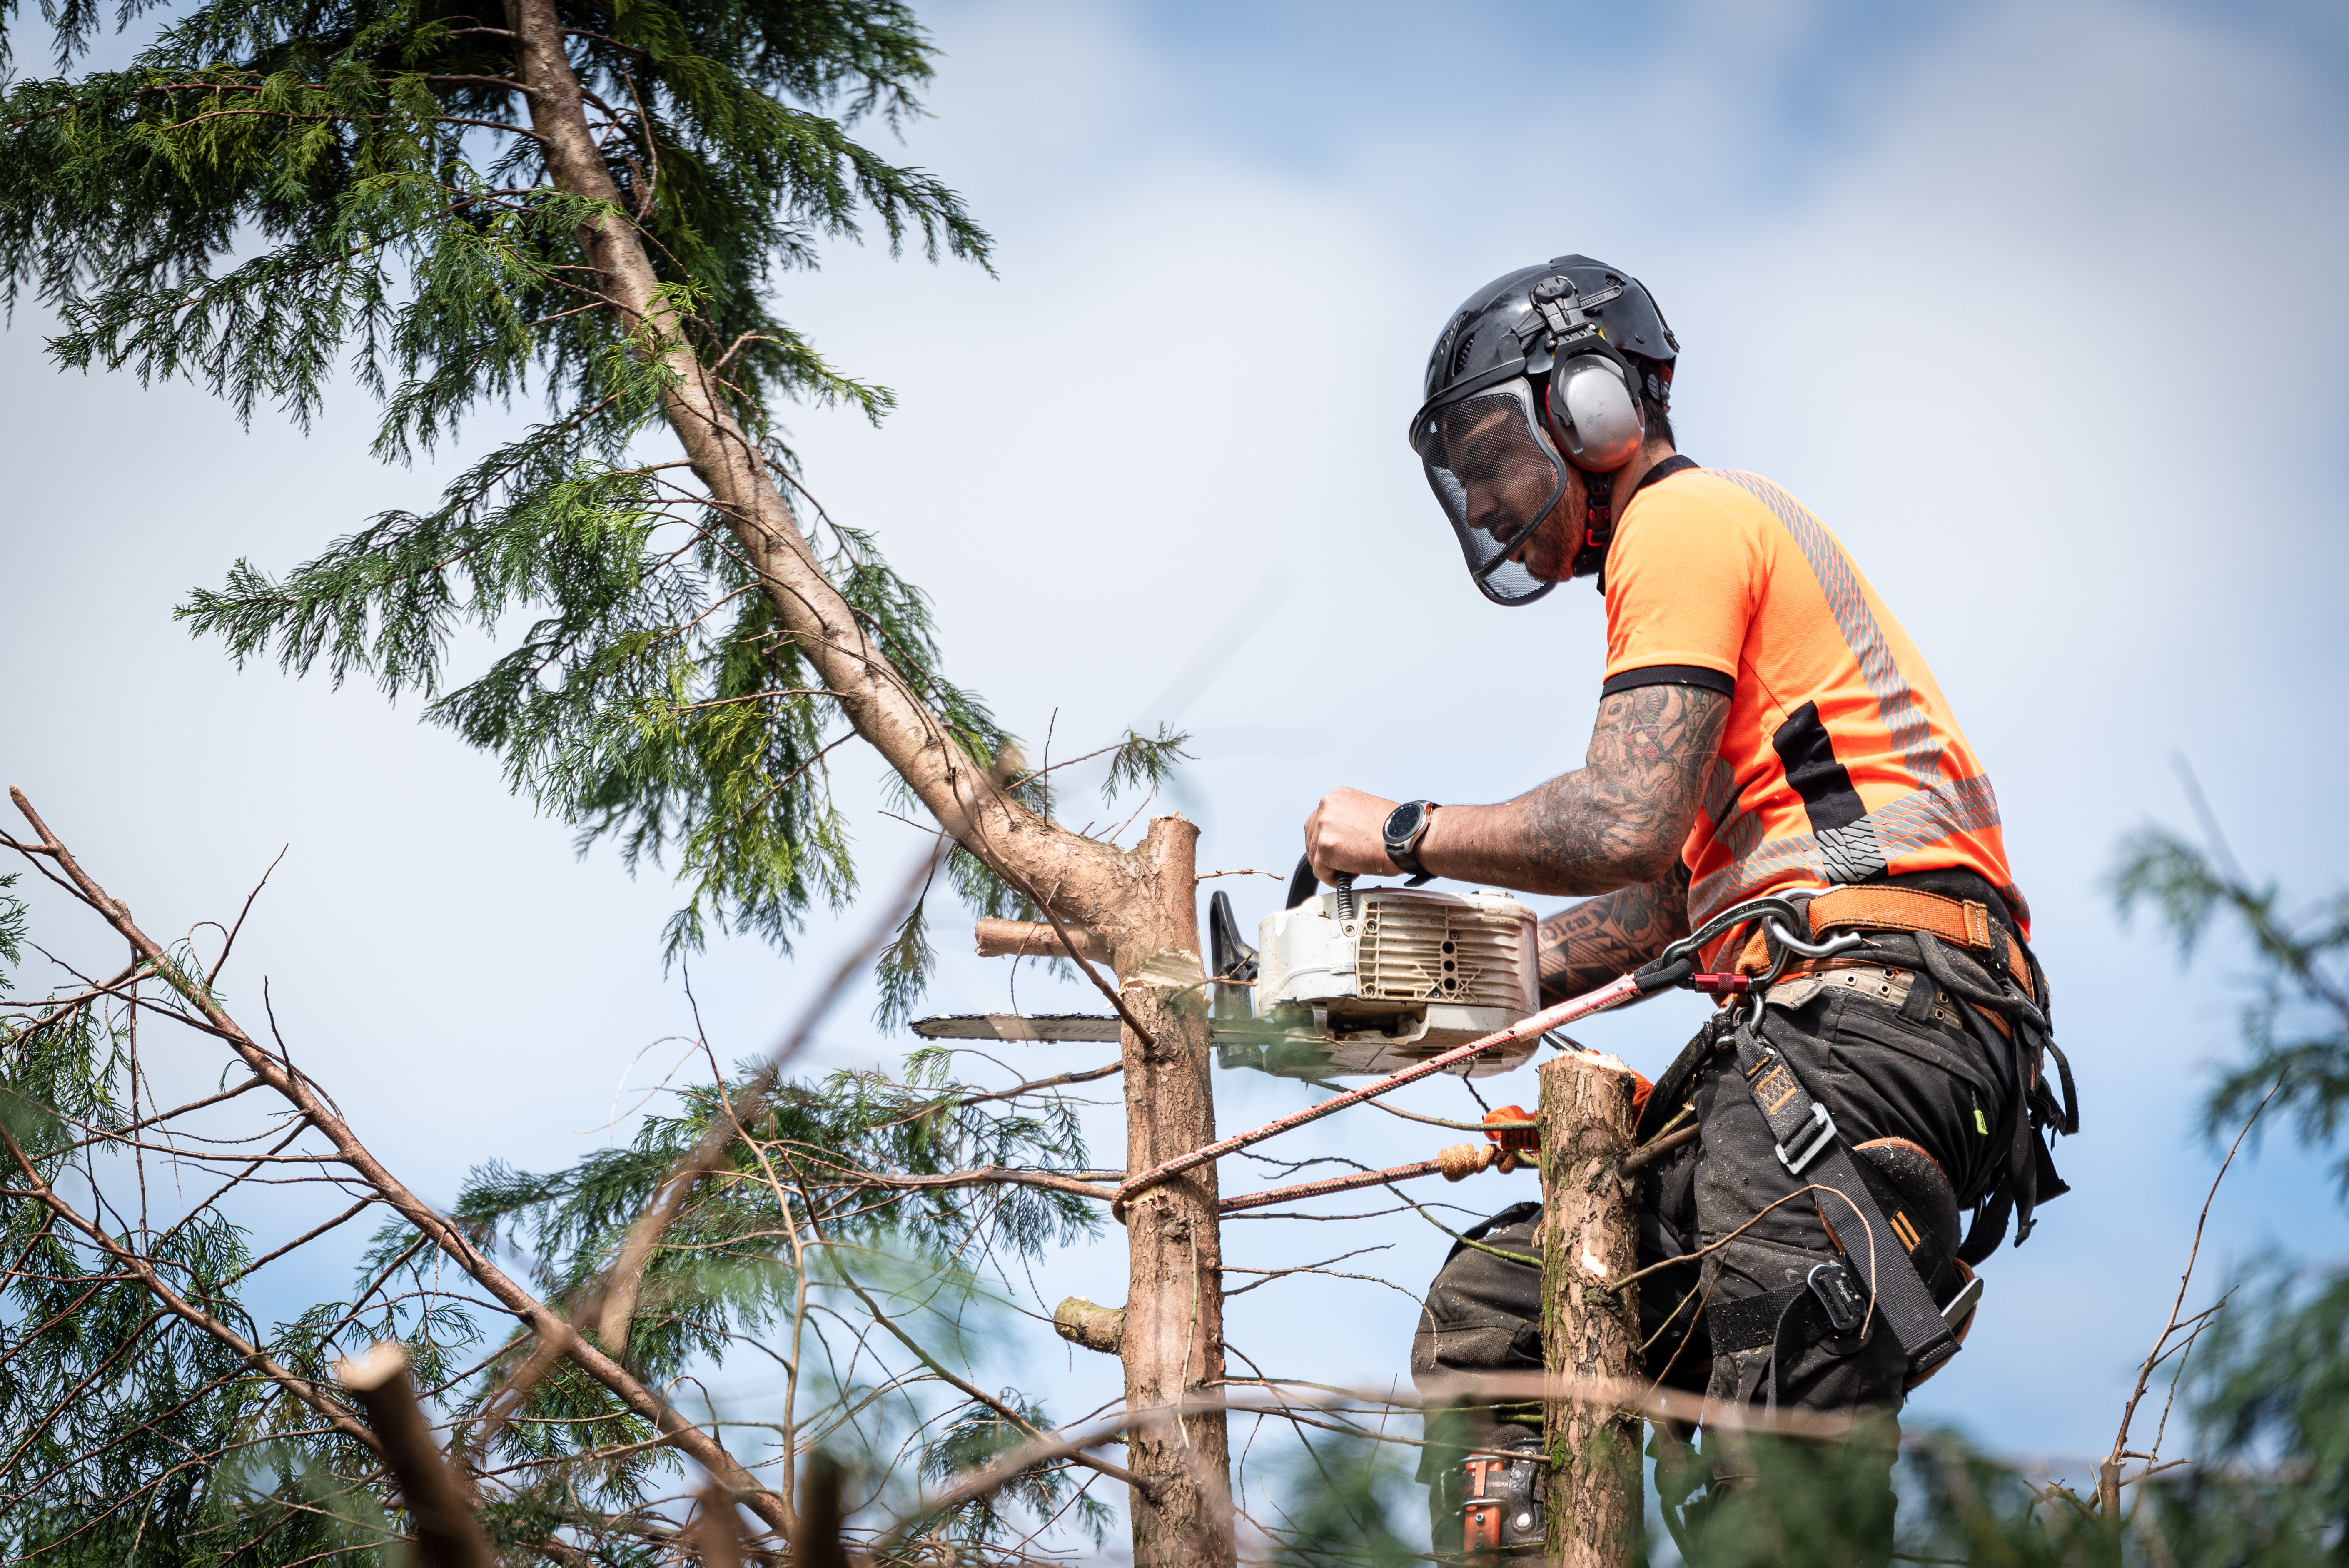 Tree Surgeons in Brierley Hill - Tree surgeon in a tree